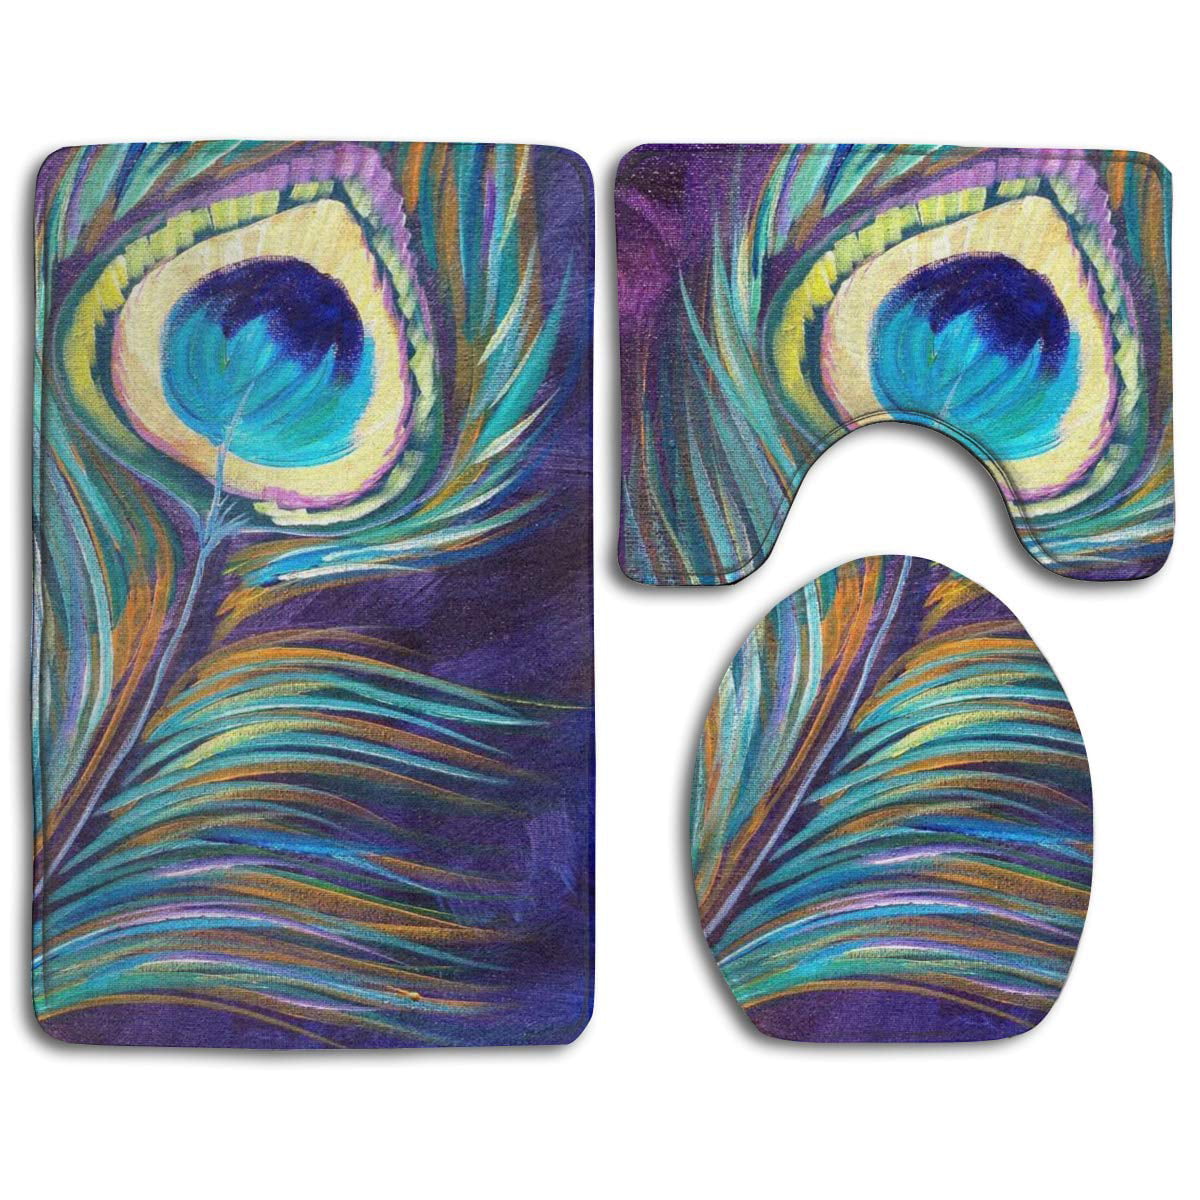 Gear New Abstract Pattern with Bright Feather Bath Rug Mat No Slip Microfiber Memory Foam 